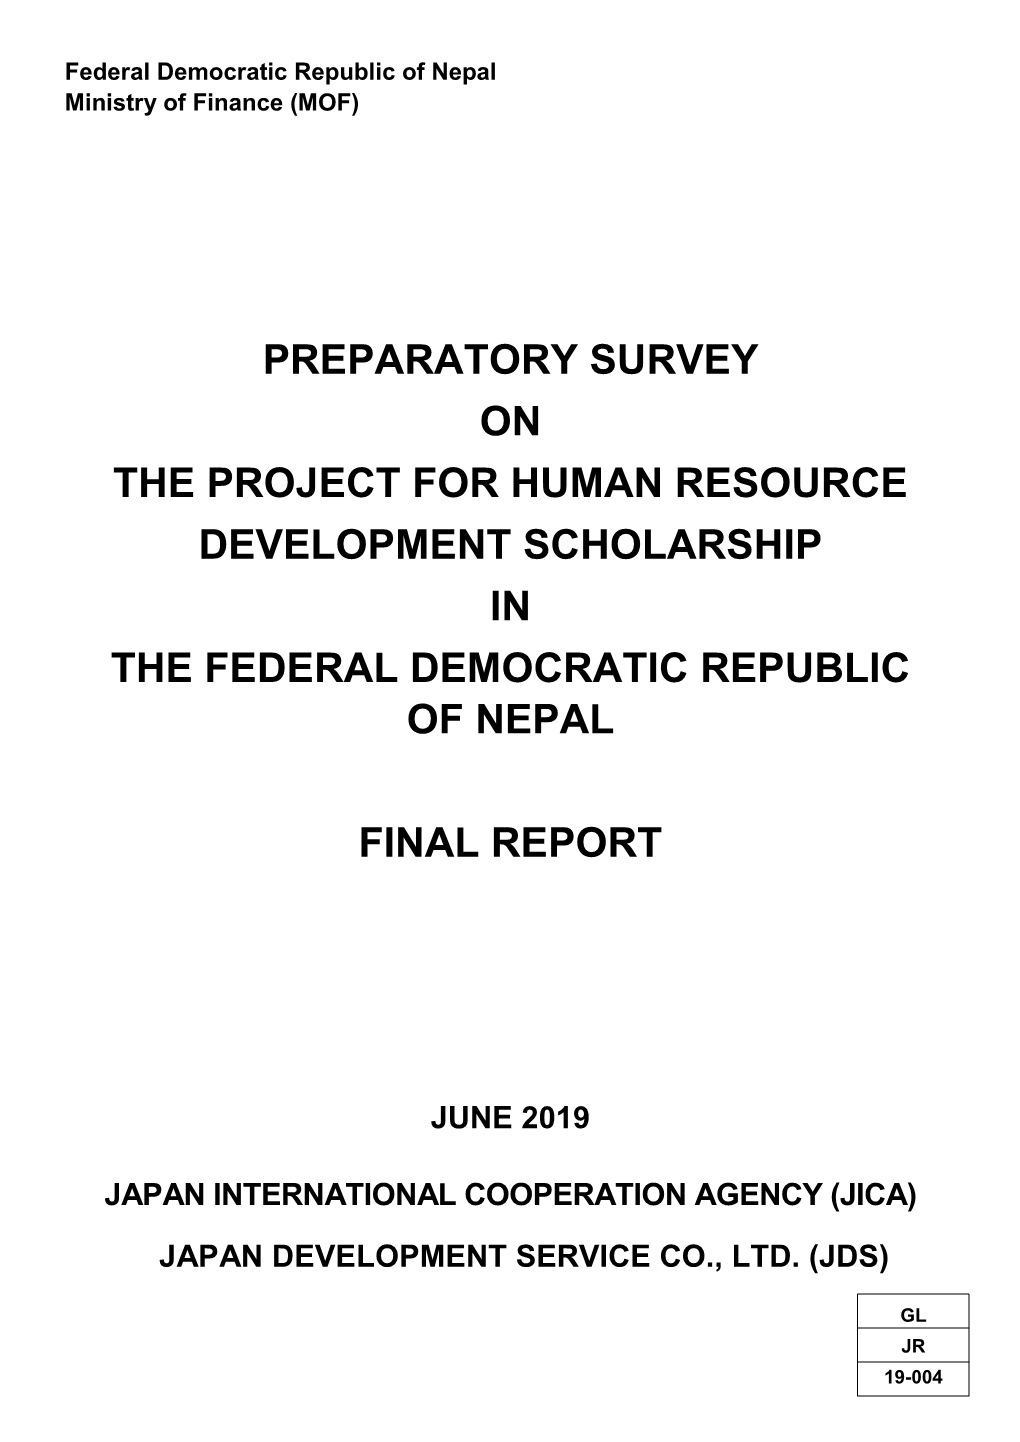 Preparatory Survey on the Project for Human Resource Development Scholarship in the Federal Democratic Republic of Nepal